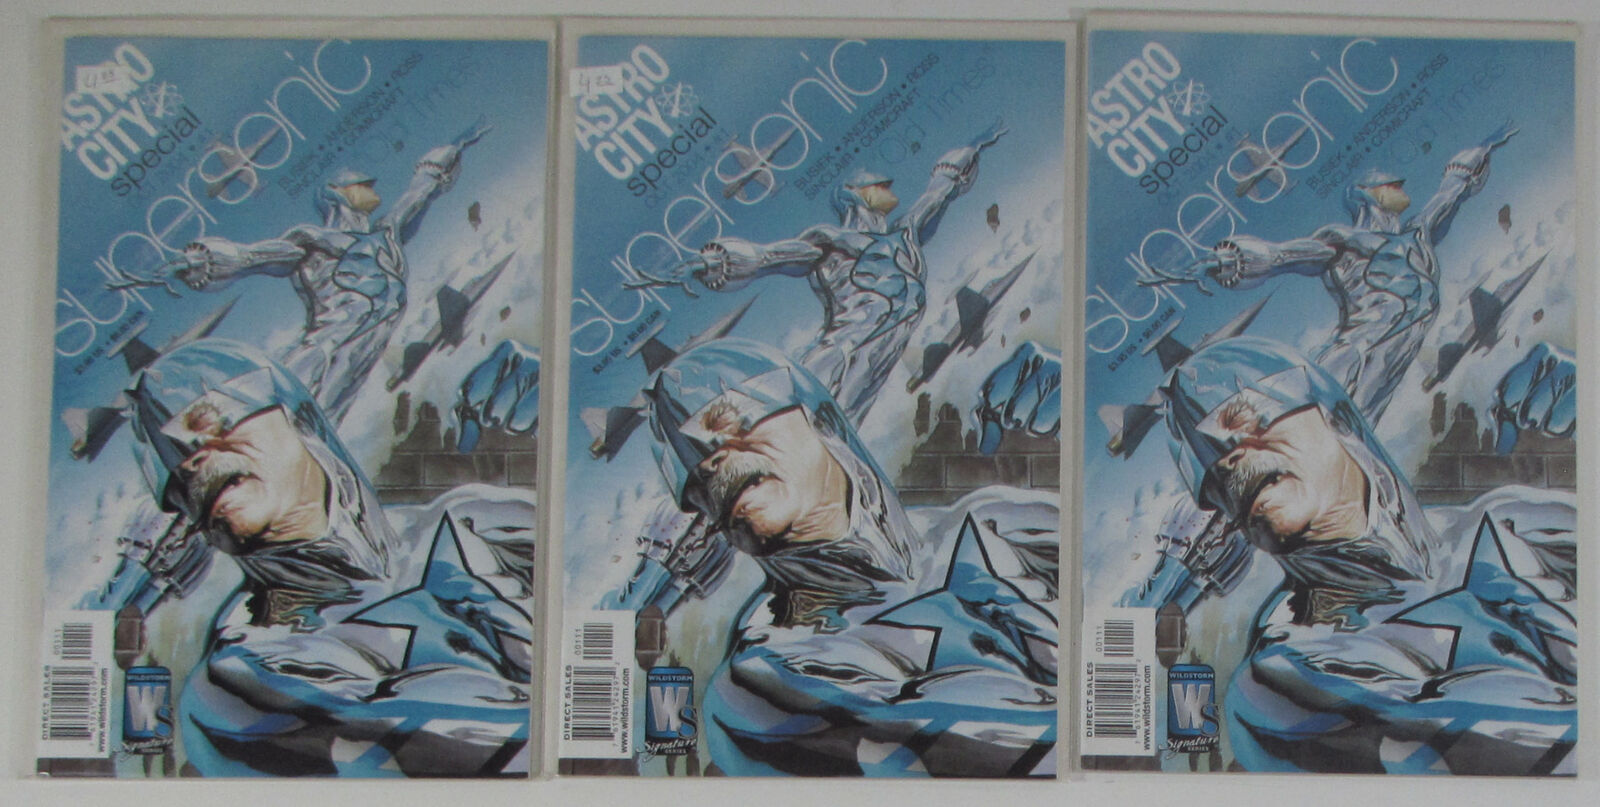 2004 Astro City Special Lot of 3 #1 WildStorm Comic Books 1st Print High Grade